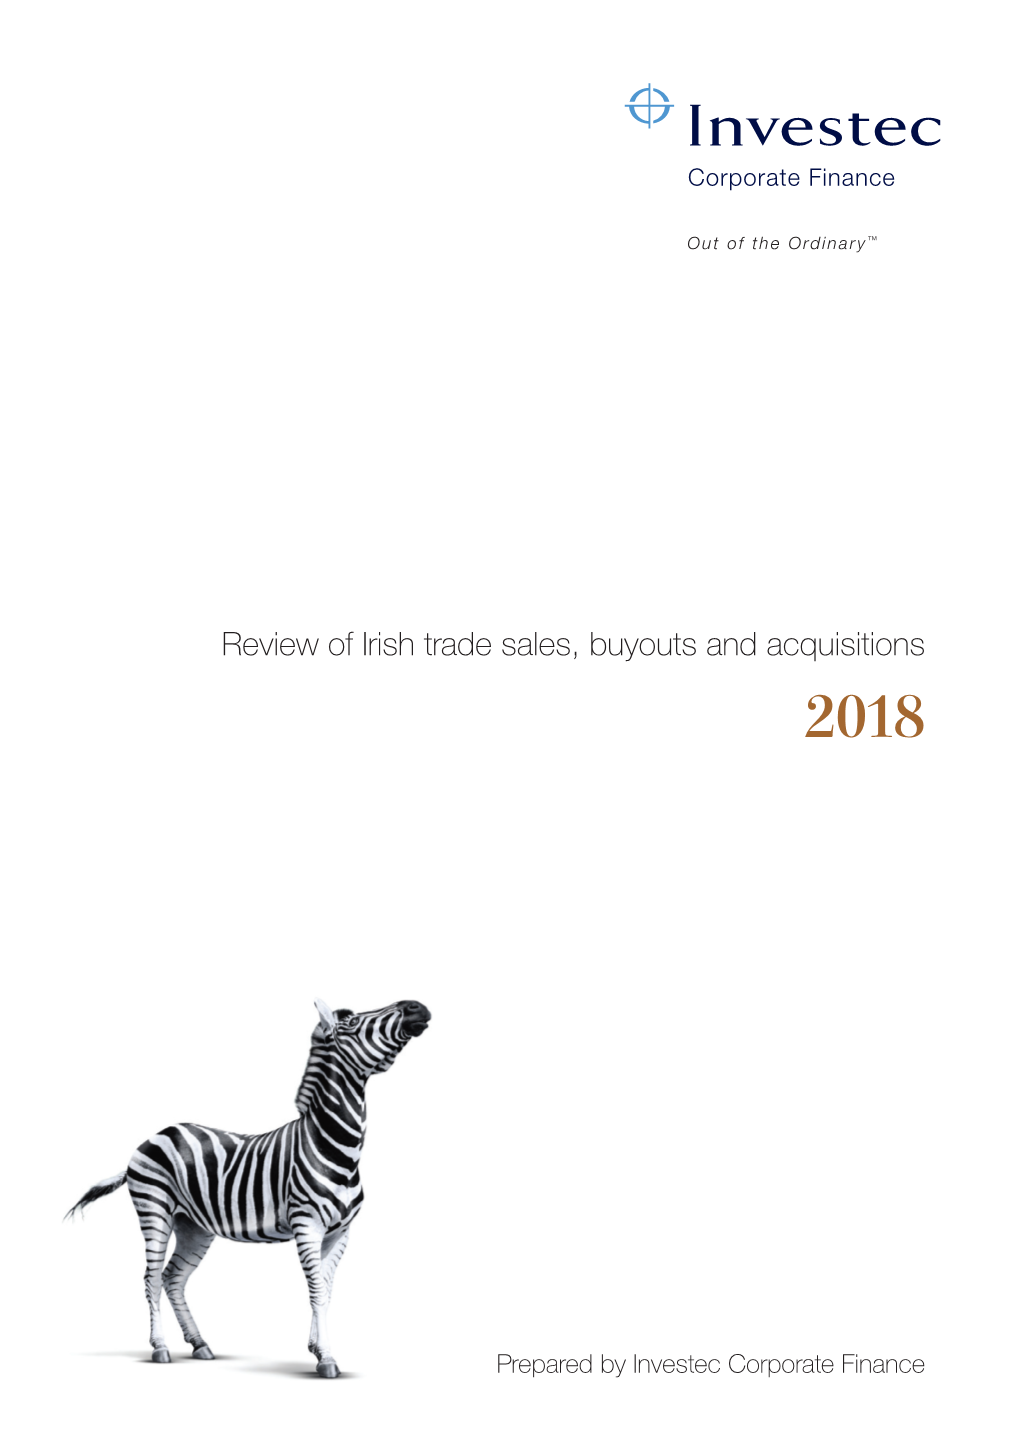 Review of Irish Trade Sales, Buyouts and Acquisitions 2018